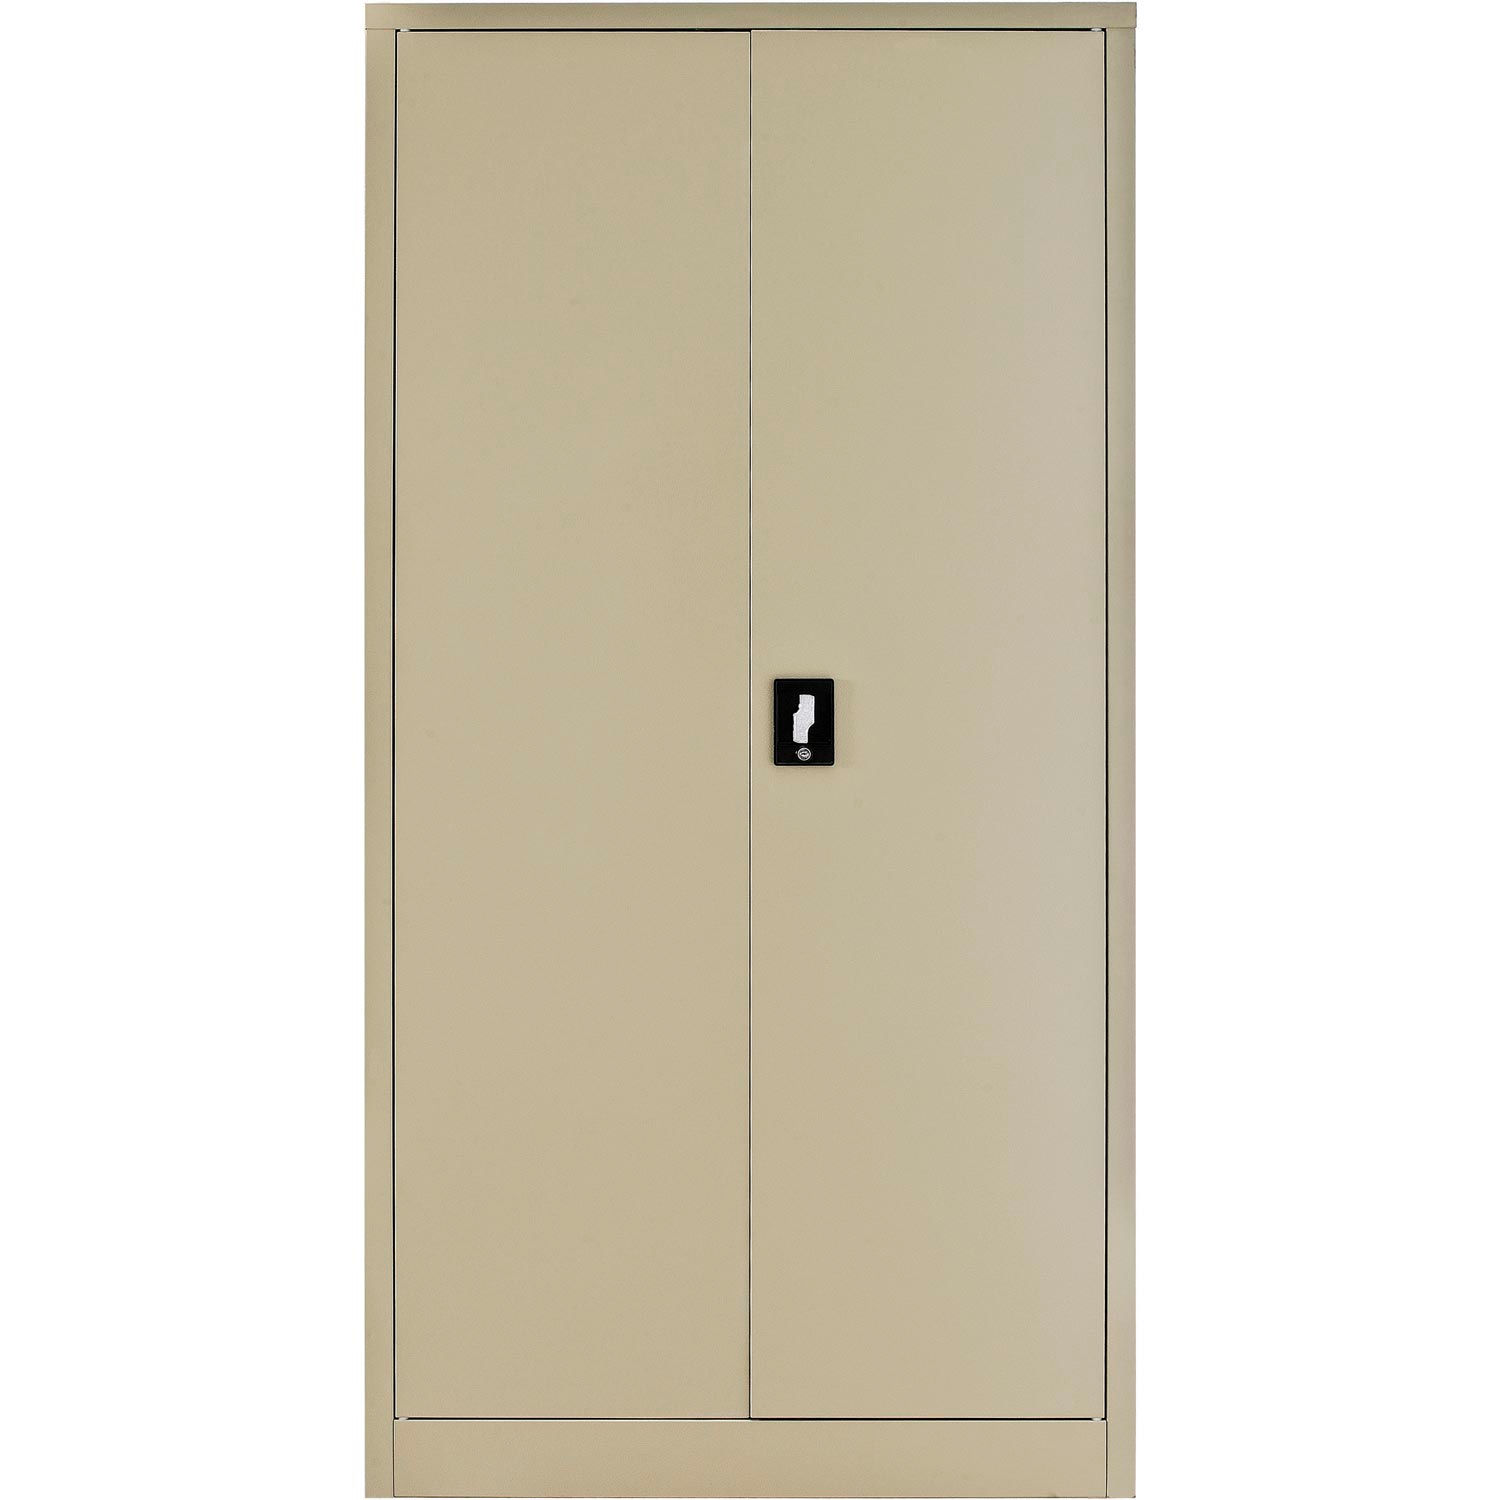 Cabinets | Janitorial | Global™ Janitorial Cabinet Assembled 36x18x72 ...